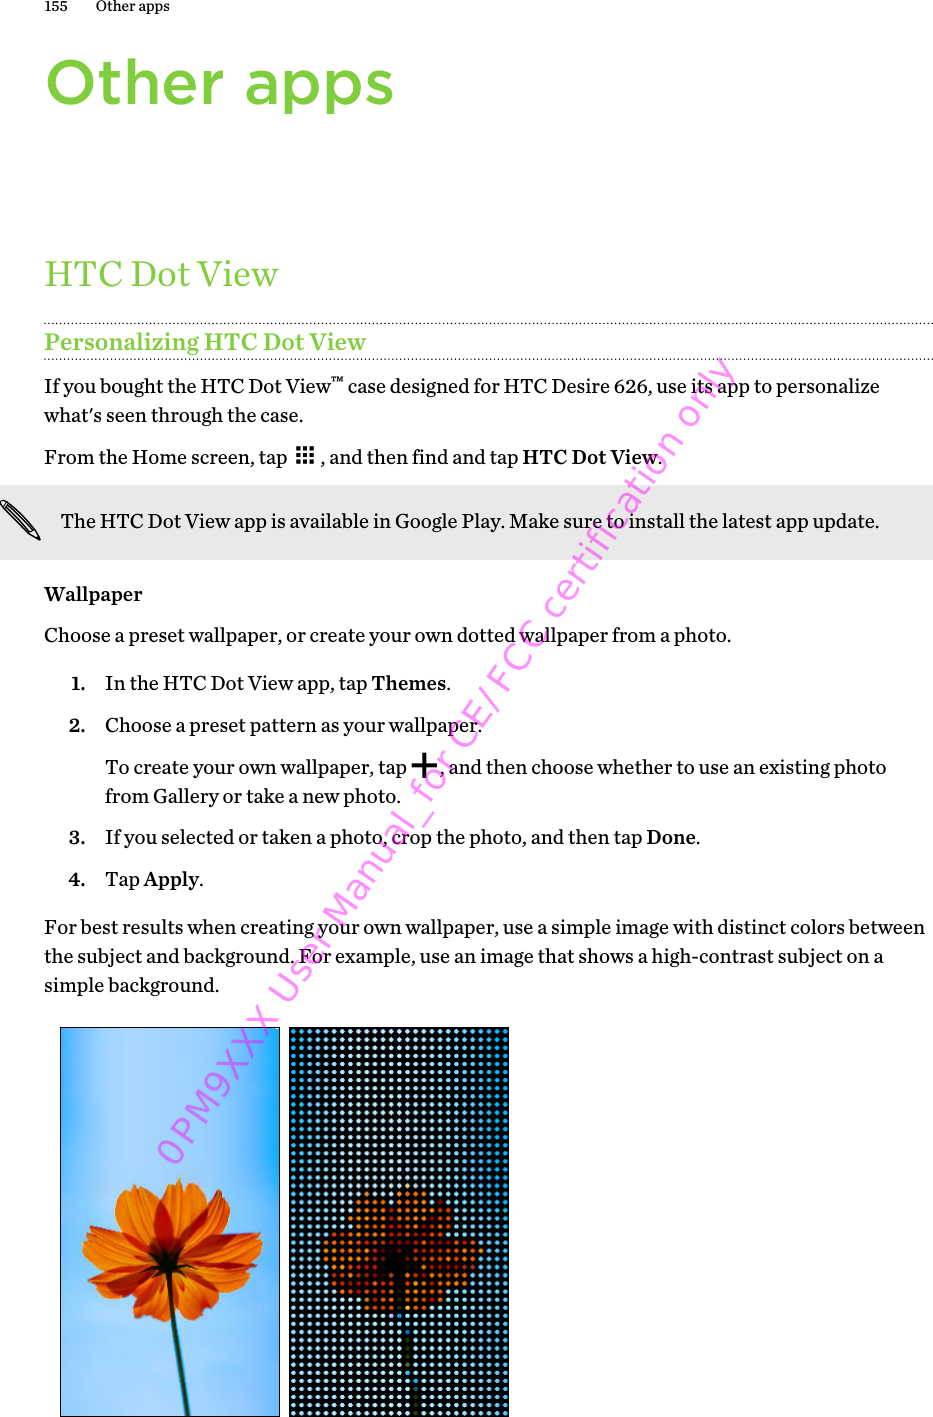 Other appsHTC Dot ViewPersonalizing HTC Dot ViewIf you bought the HTC Dot View™ case designed for HTC Desire 626, use its app to personalizewhat&apos;s seen through the case.From the Home screen, tap  , and then find and tap HTC Dot View.The HTC Dot View app is available in Google Play. Make sure to install the latest app update.WallpaperChoose a preset wallpaper, or create your own dotted wallpaper from a photo.1. In the HTC Dot View app, tap Themes.2. Choose a preset pattern as your wallpaper. To create your own wallpaper, tap  , and then choose whether to use an existing photofrom Gallery or take a new photo.3. If you selected or taken a photo, crop the photo, and then tap Done.4. Tap Apply.For best results when creating your own wallpaper, use a simple image with distinct colors betweenthe subject and background. For example, use an image that shows a high-contrast subject on asimple background.155 Other apps0PM9XXX User Manual_for CE/FCC certification only